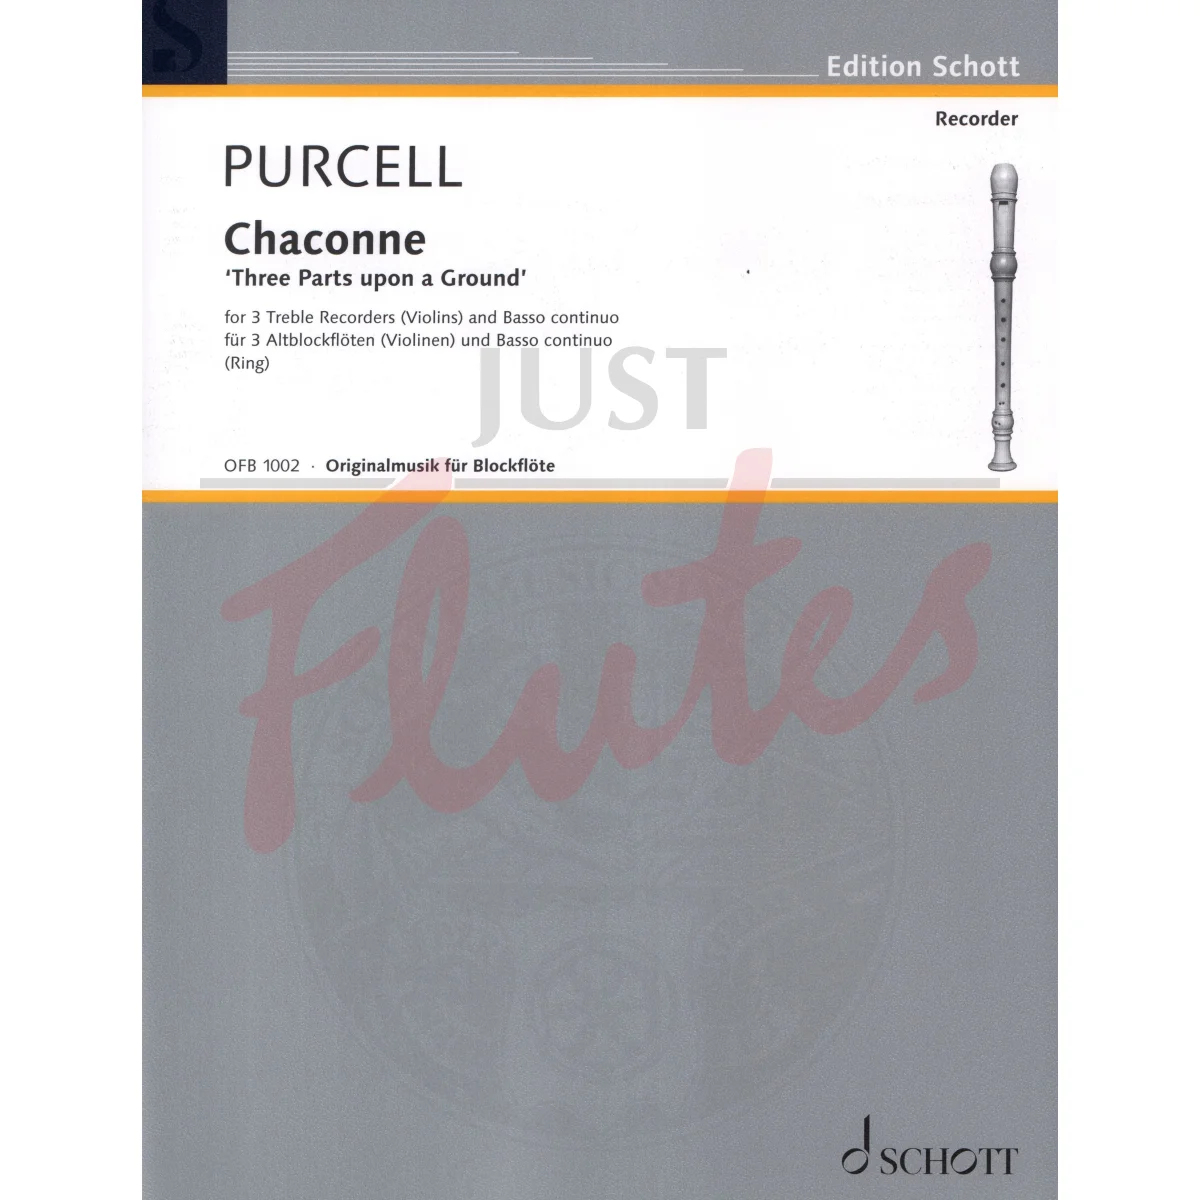 Chaconne &quot;Three Parts upon a Ground&quot; for Three Flutes/Treble Recorders/Vioilns and Basso Continuo